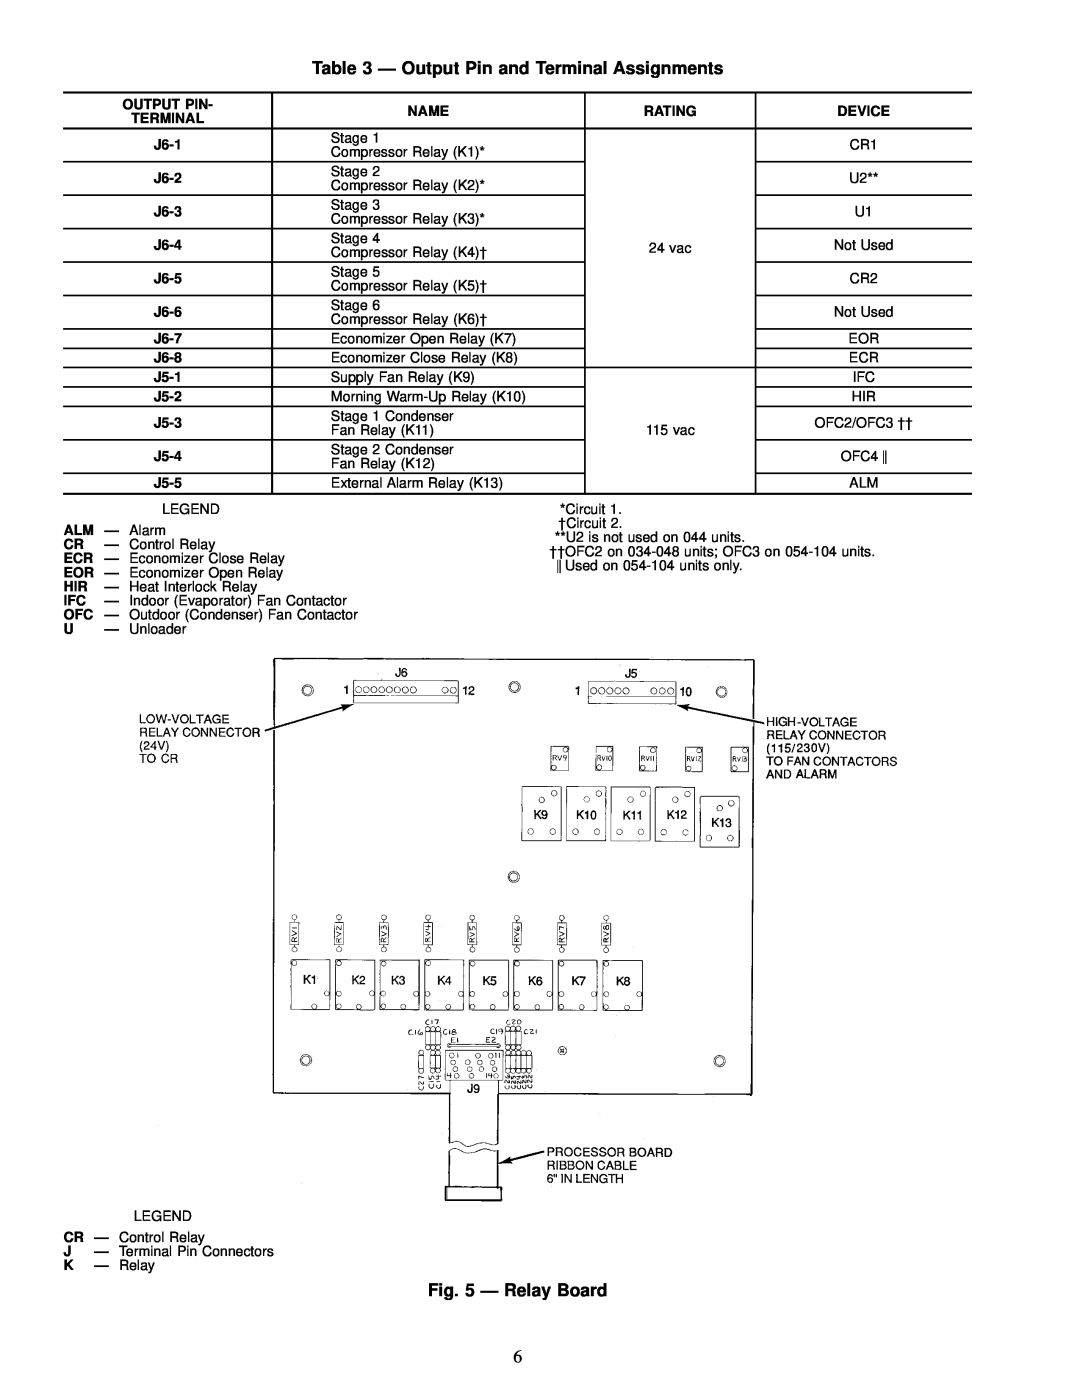 Carrier JK034-074, 50FK, 48FK specifications Ð Output Pin and Terminal Assignments, Ð Relay Board 